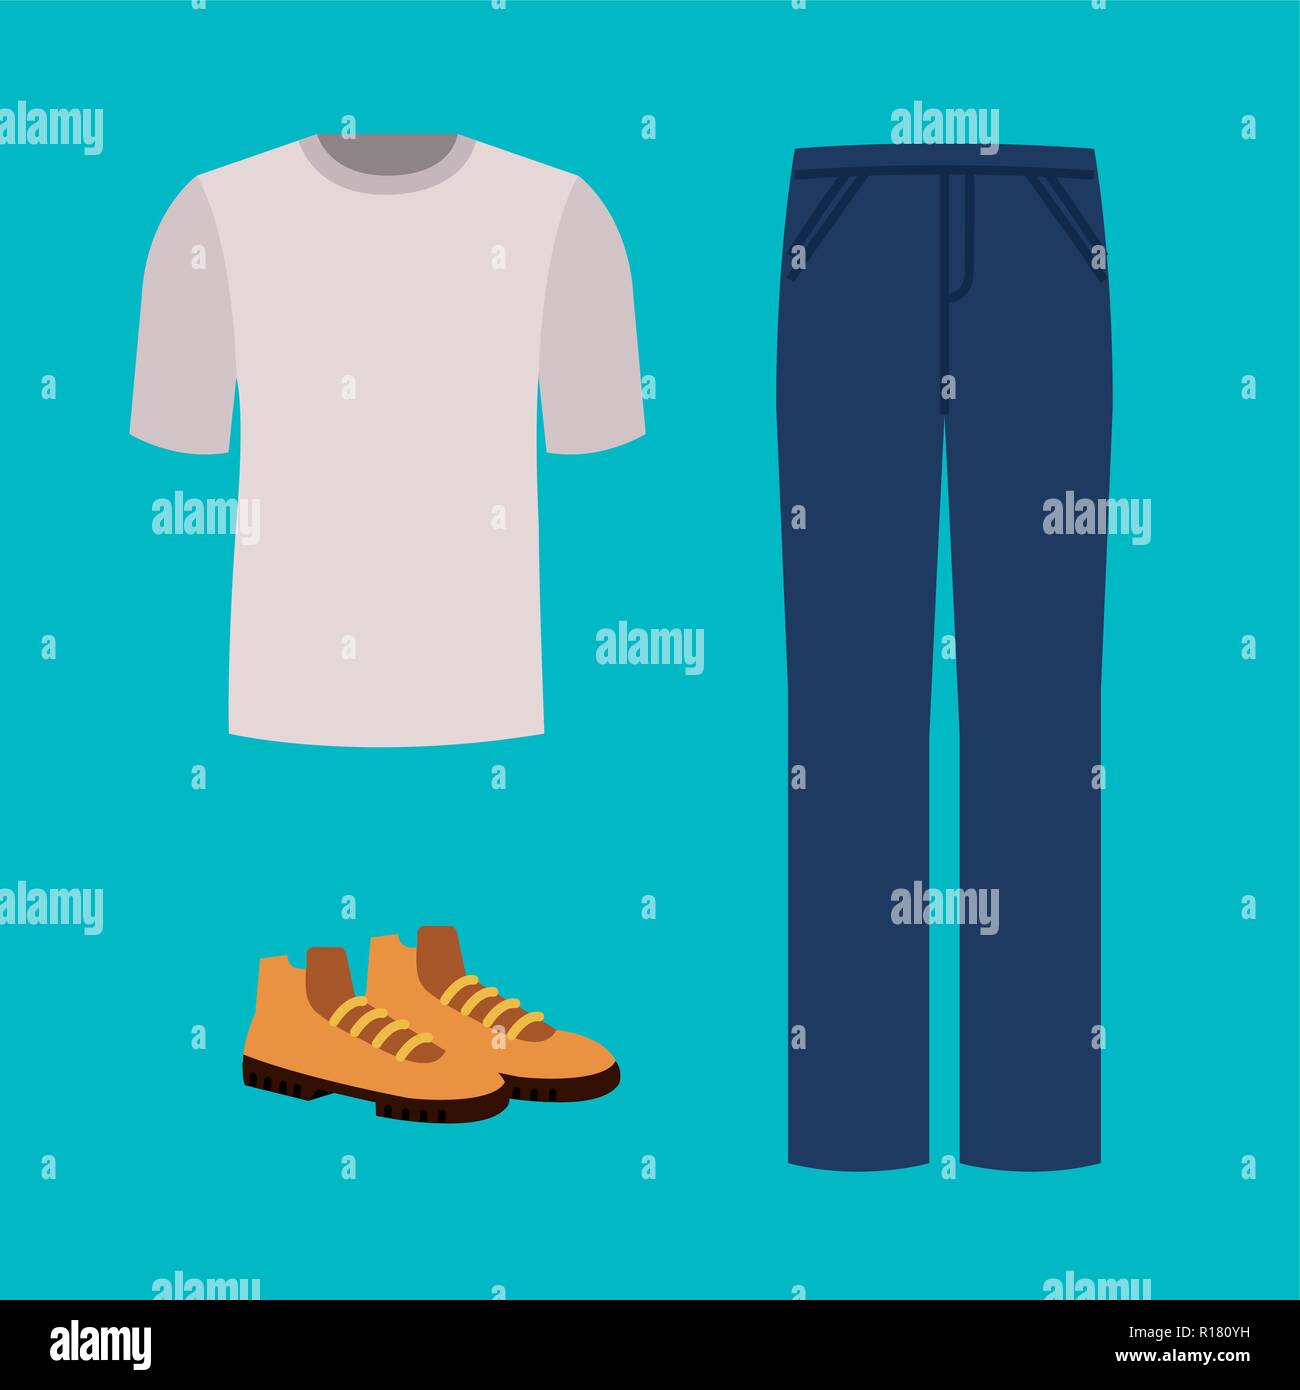 Jean shoe Stock Vector Images - Alamy